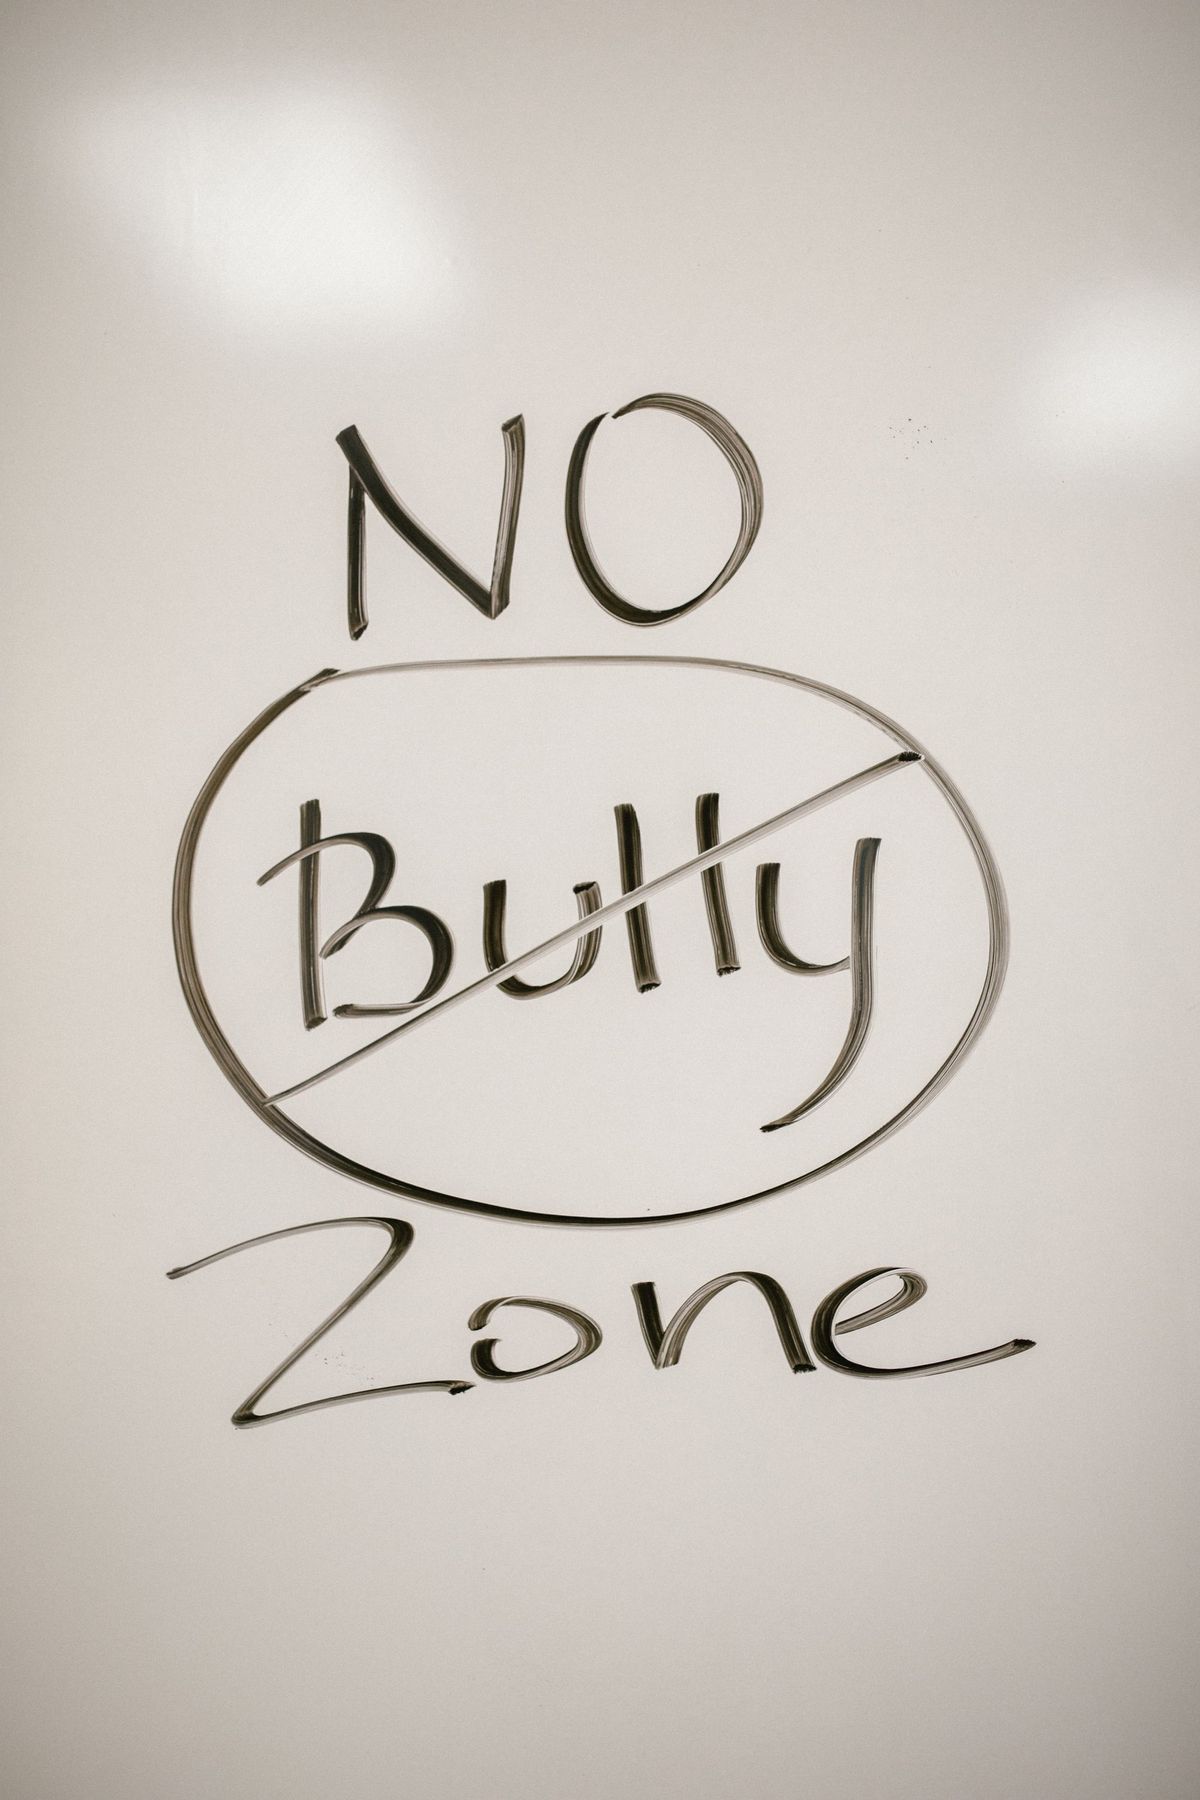 Workplace Bullying: Definition, Causes, and Remedies